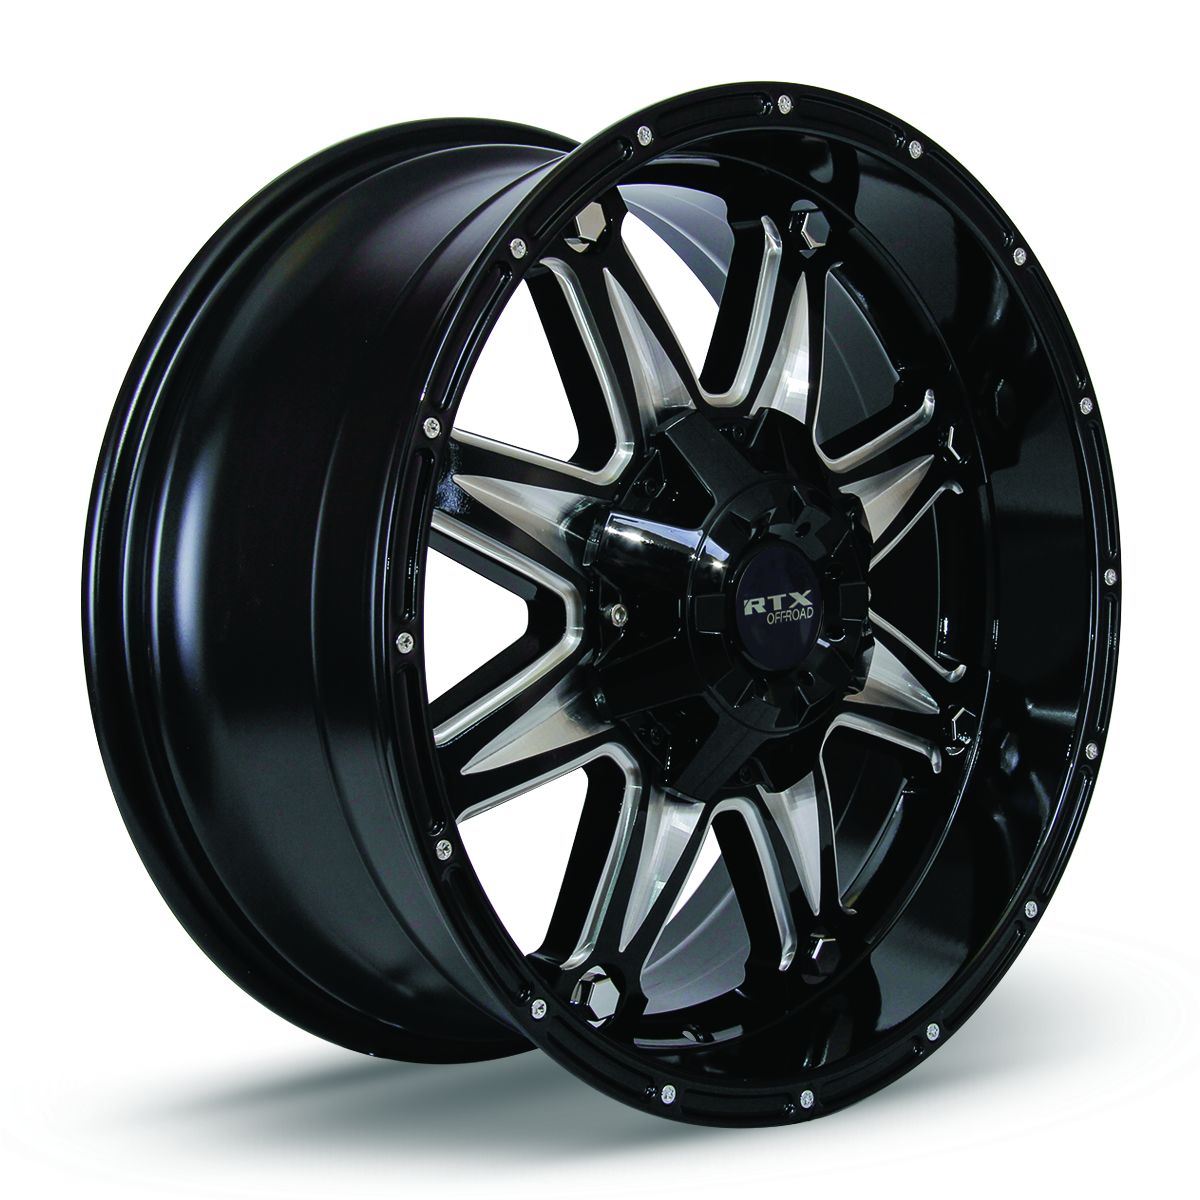 Spine • Black with Milled Spokes • 20x9 6x139.7 ET10 CB106.1